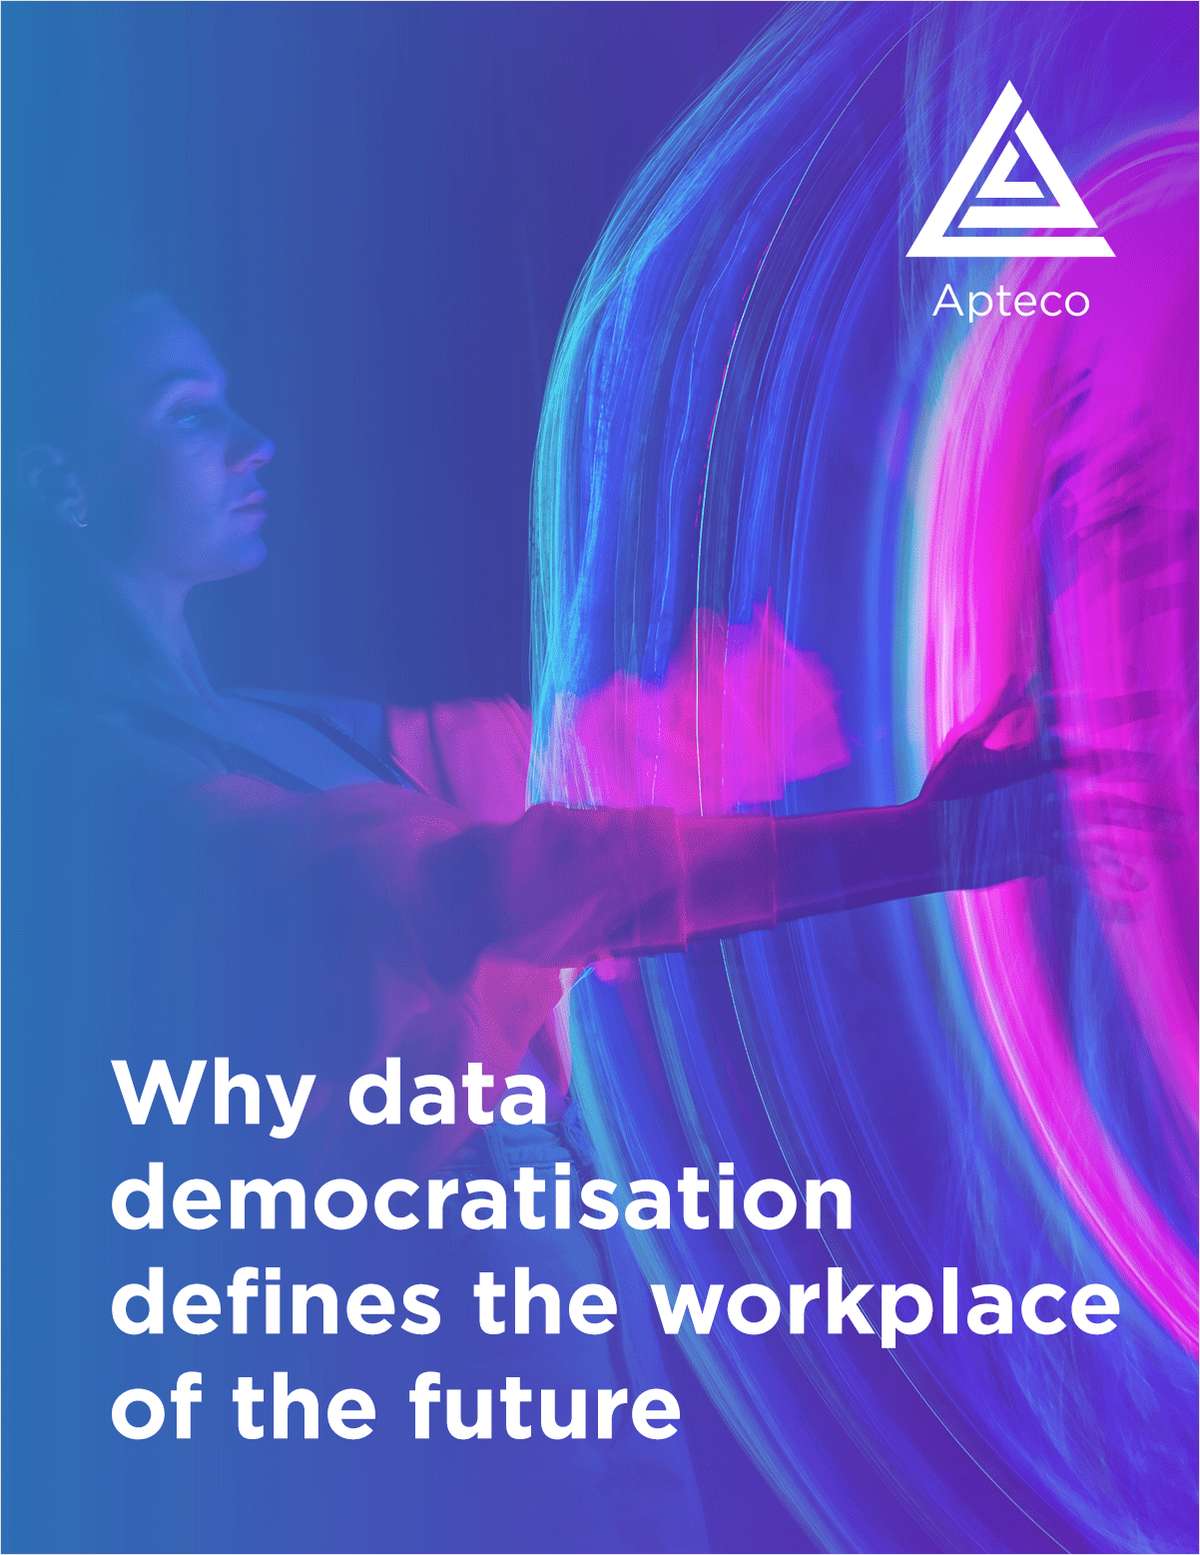 Why data democratisation defines the workplace of the future